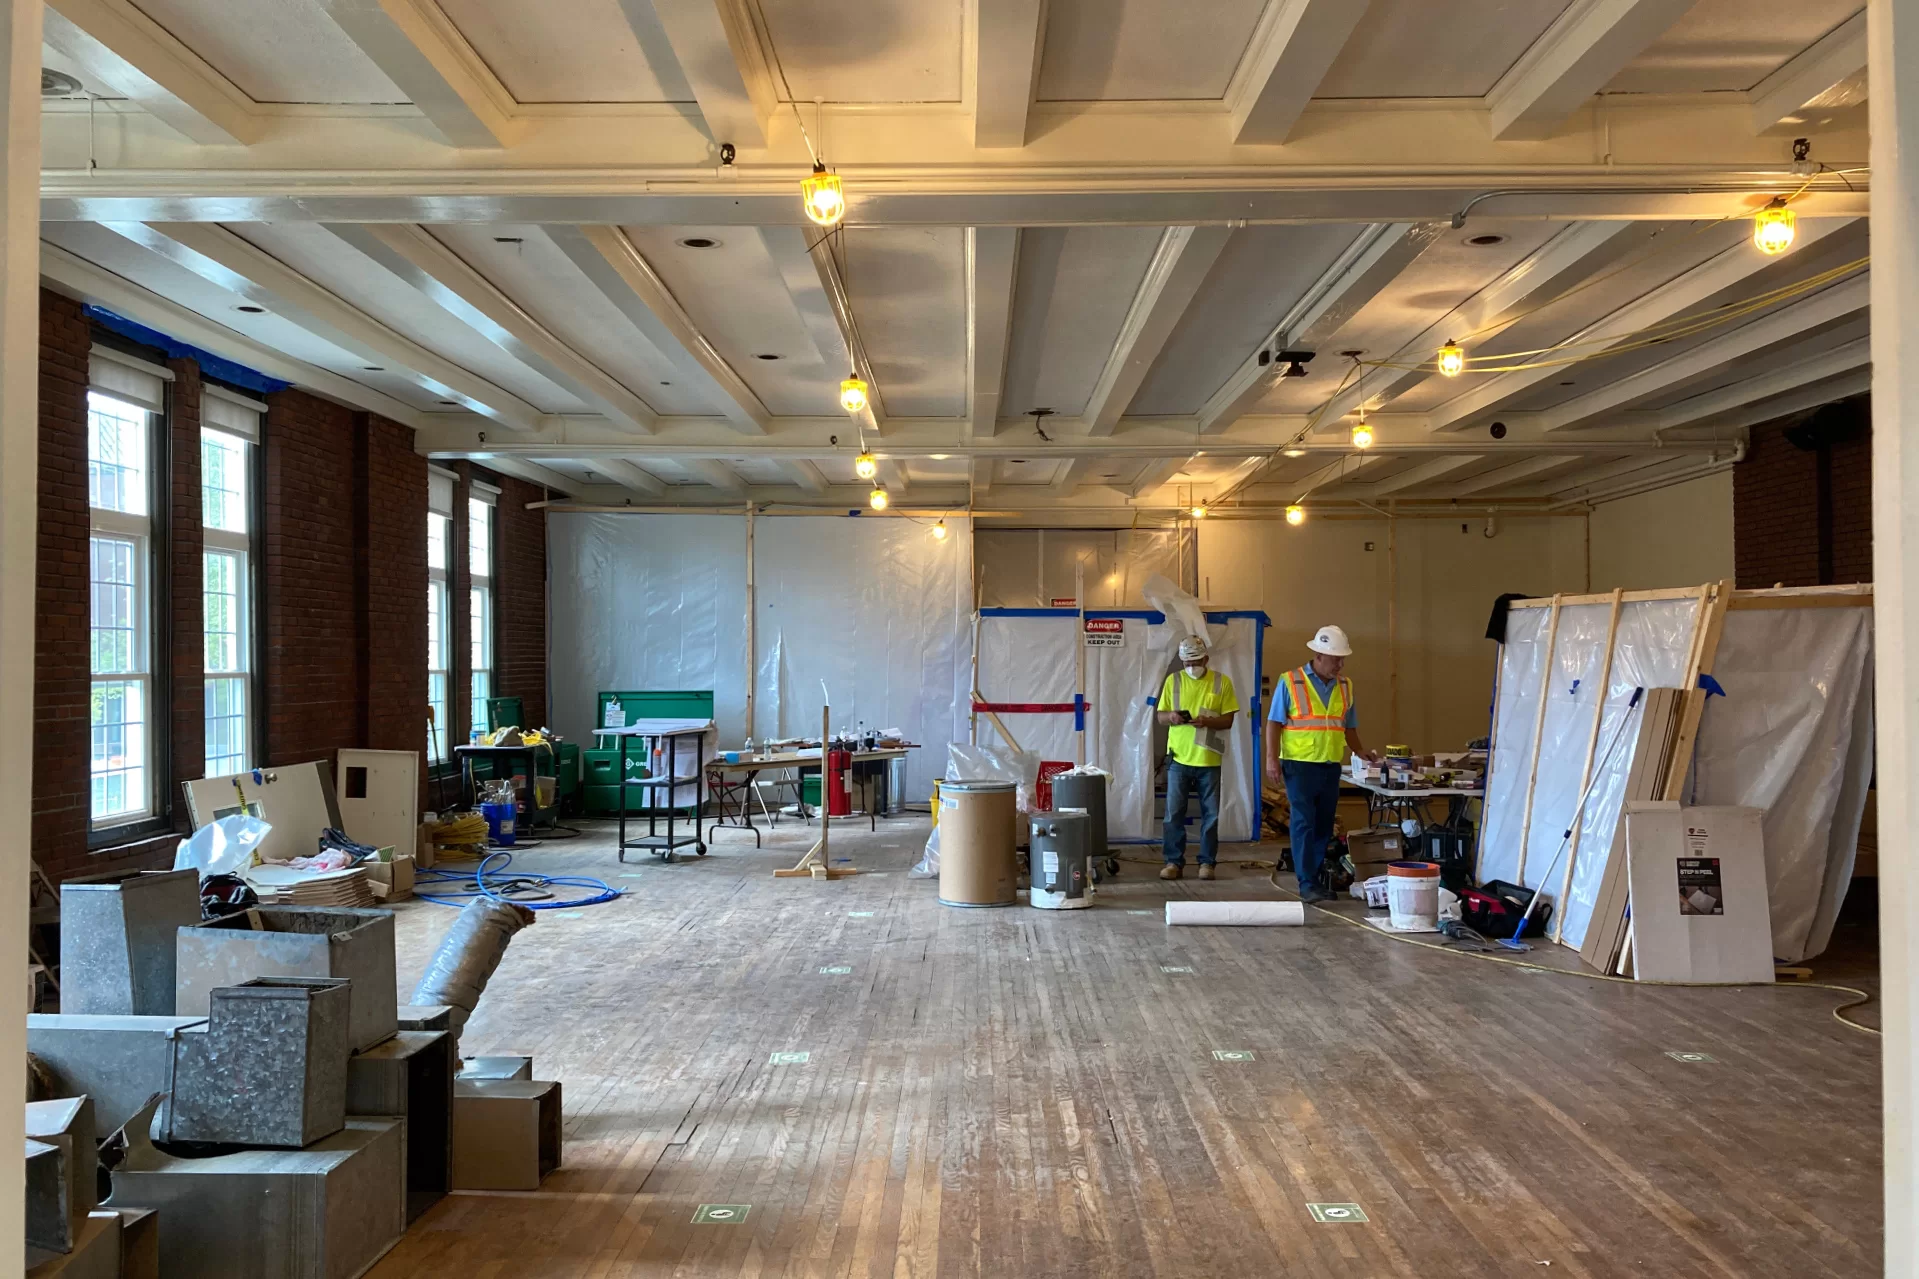 Chase Lounge will get a makeover in the coming months, but at the moment it provides office and supply space for workers on the Chase Hall renovation. Behind the poly sheeting, hazardous waste abatement is underway.  (Doug Hubley/Bates College)